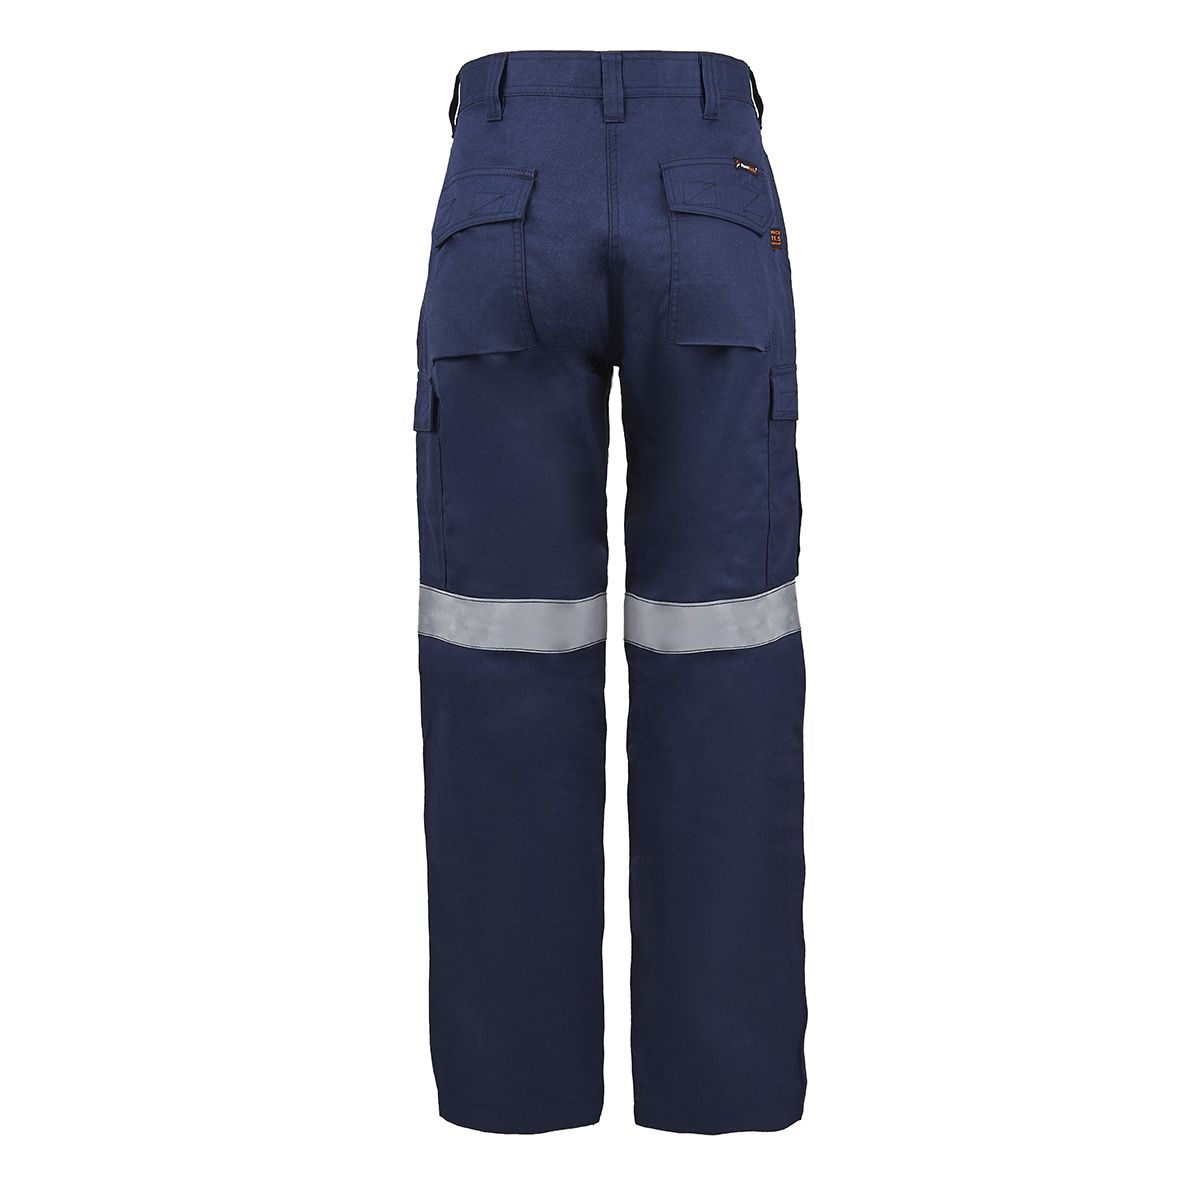 FlameBuster Torrent Fr Womens Navy Taped Cargo Pants atpv 11.5/HRC2 240g 6